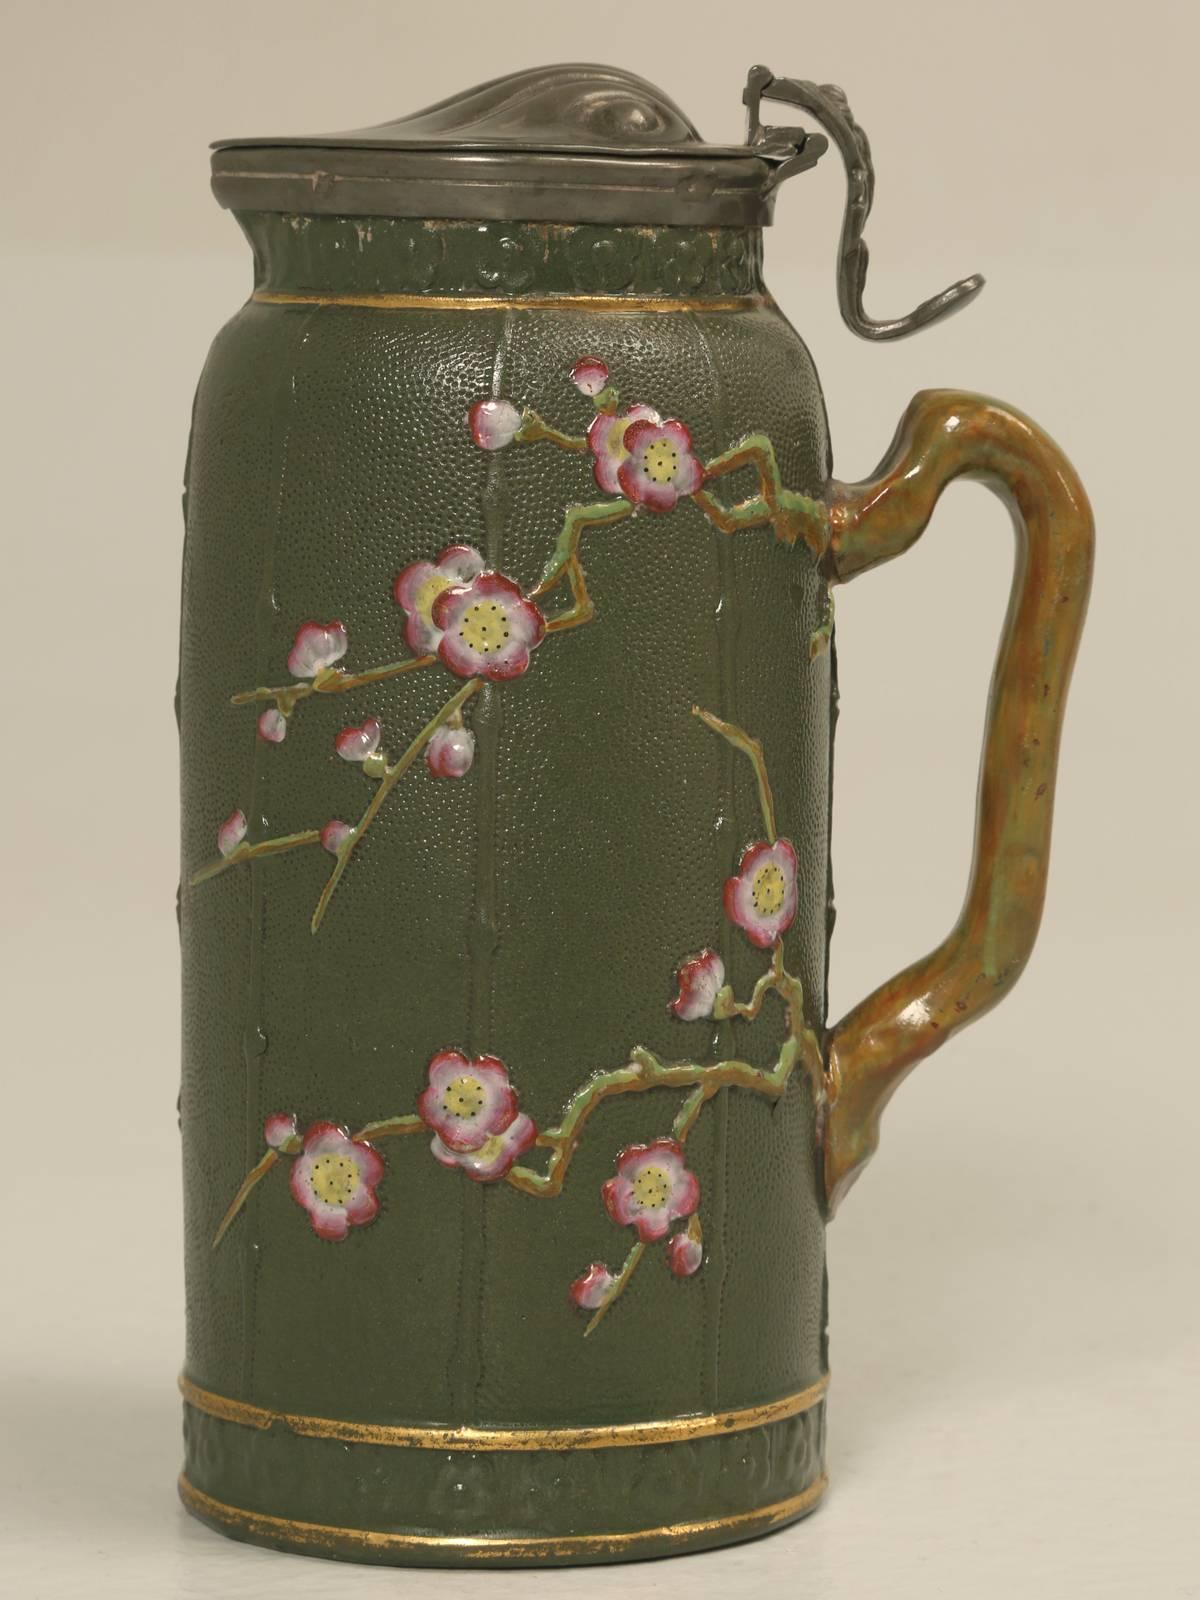 Antique English stafforshire pottery pitcher Chinese Chippendale (Choissong) style with a pewter lid. There are no cracks, nor any prior repairs and other than the patina on the pewter, looks almost flawless.